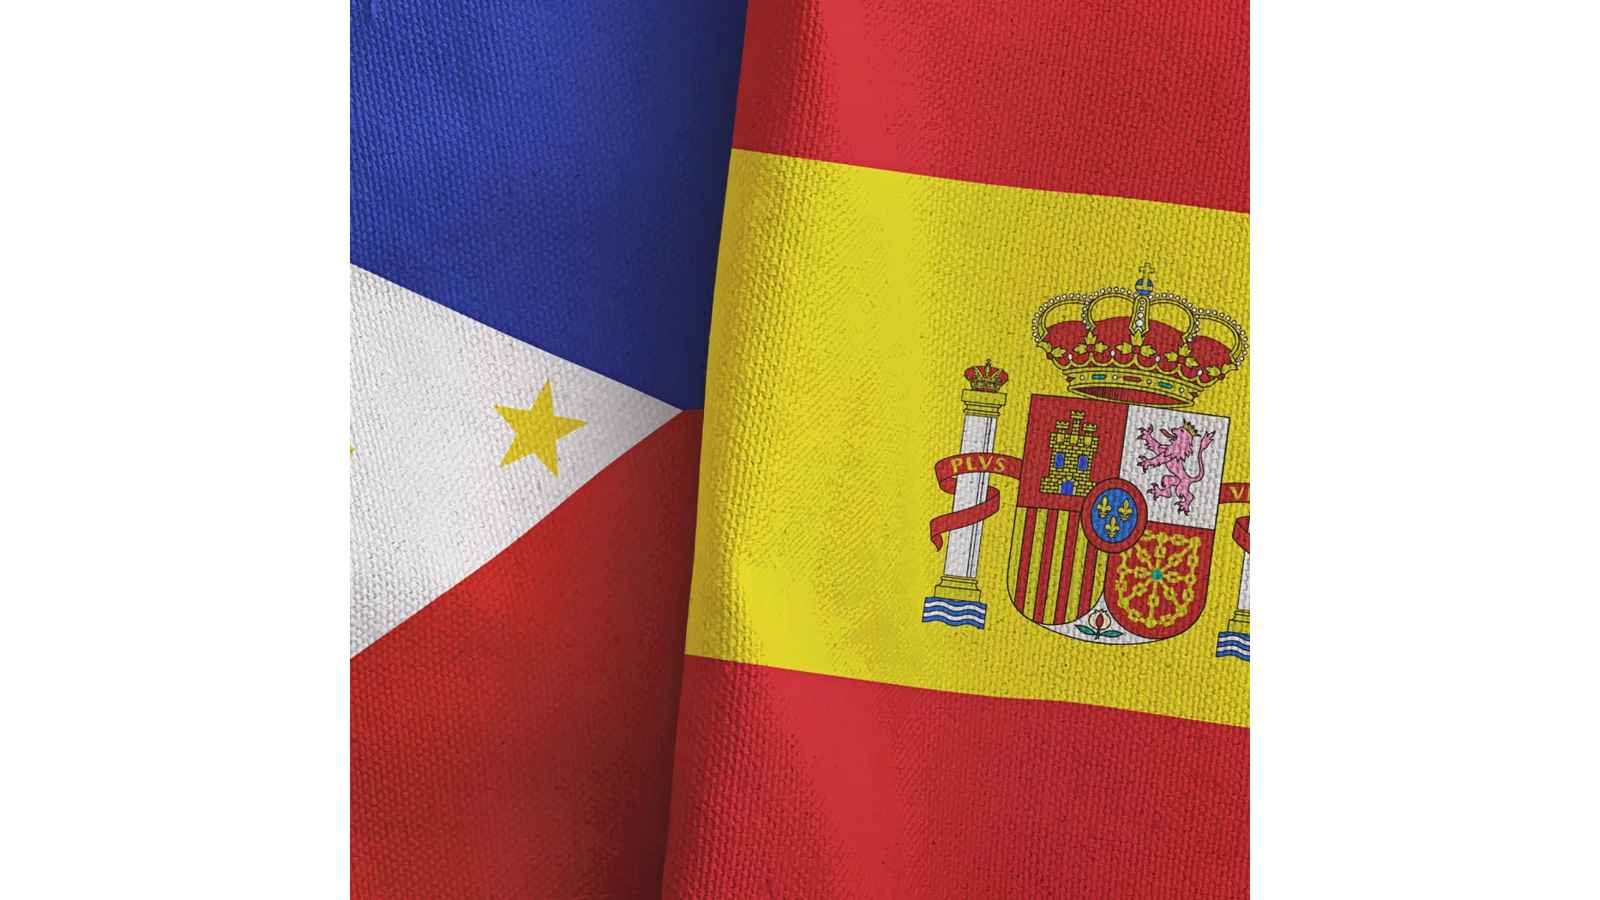 Philippine-Spanish Friendship Day 2023: Date, History, Facts about Philippines